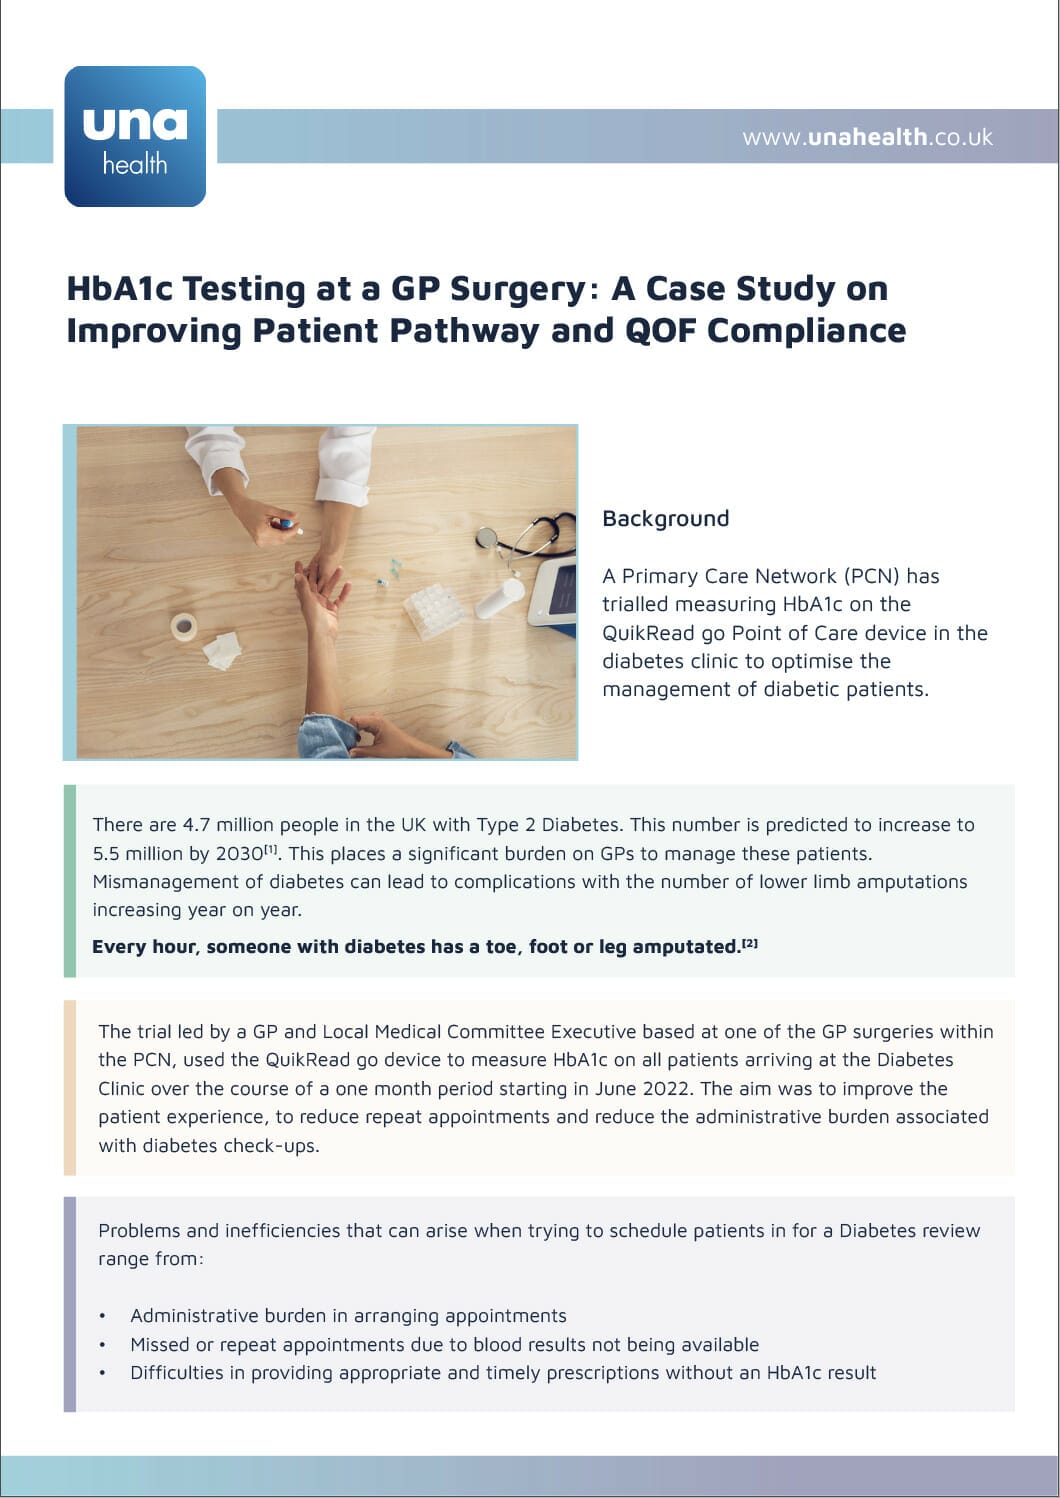 HbA1c Testing at a GP Surgery: A Case Study on Improving Patient Pathway